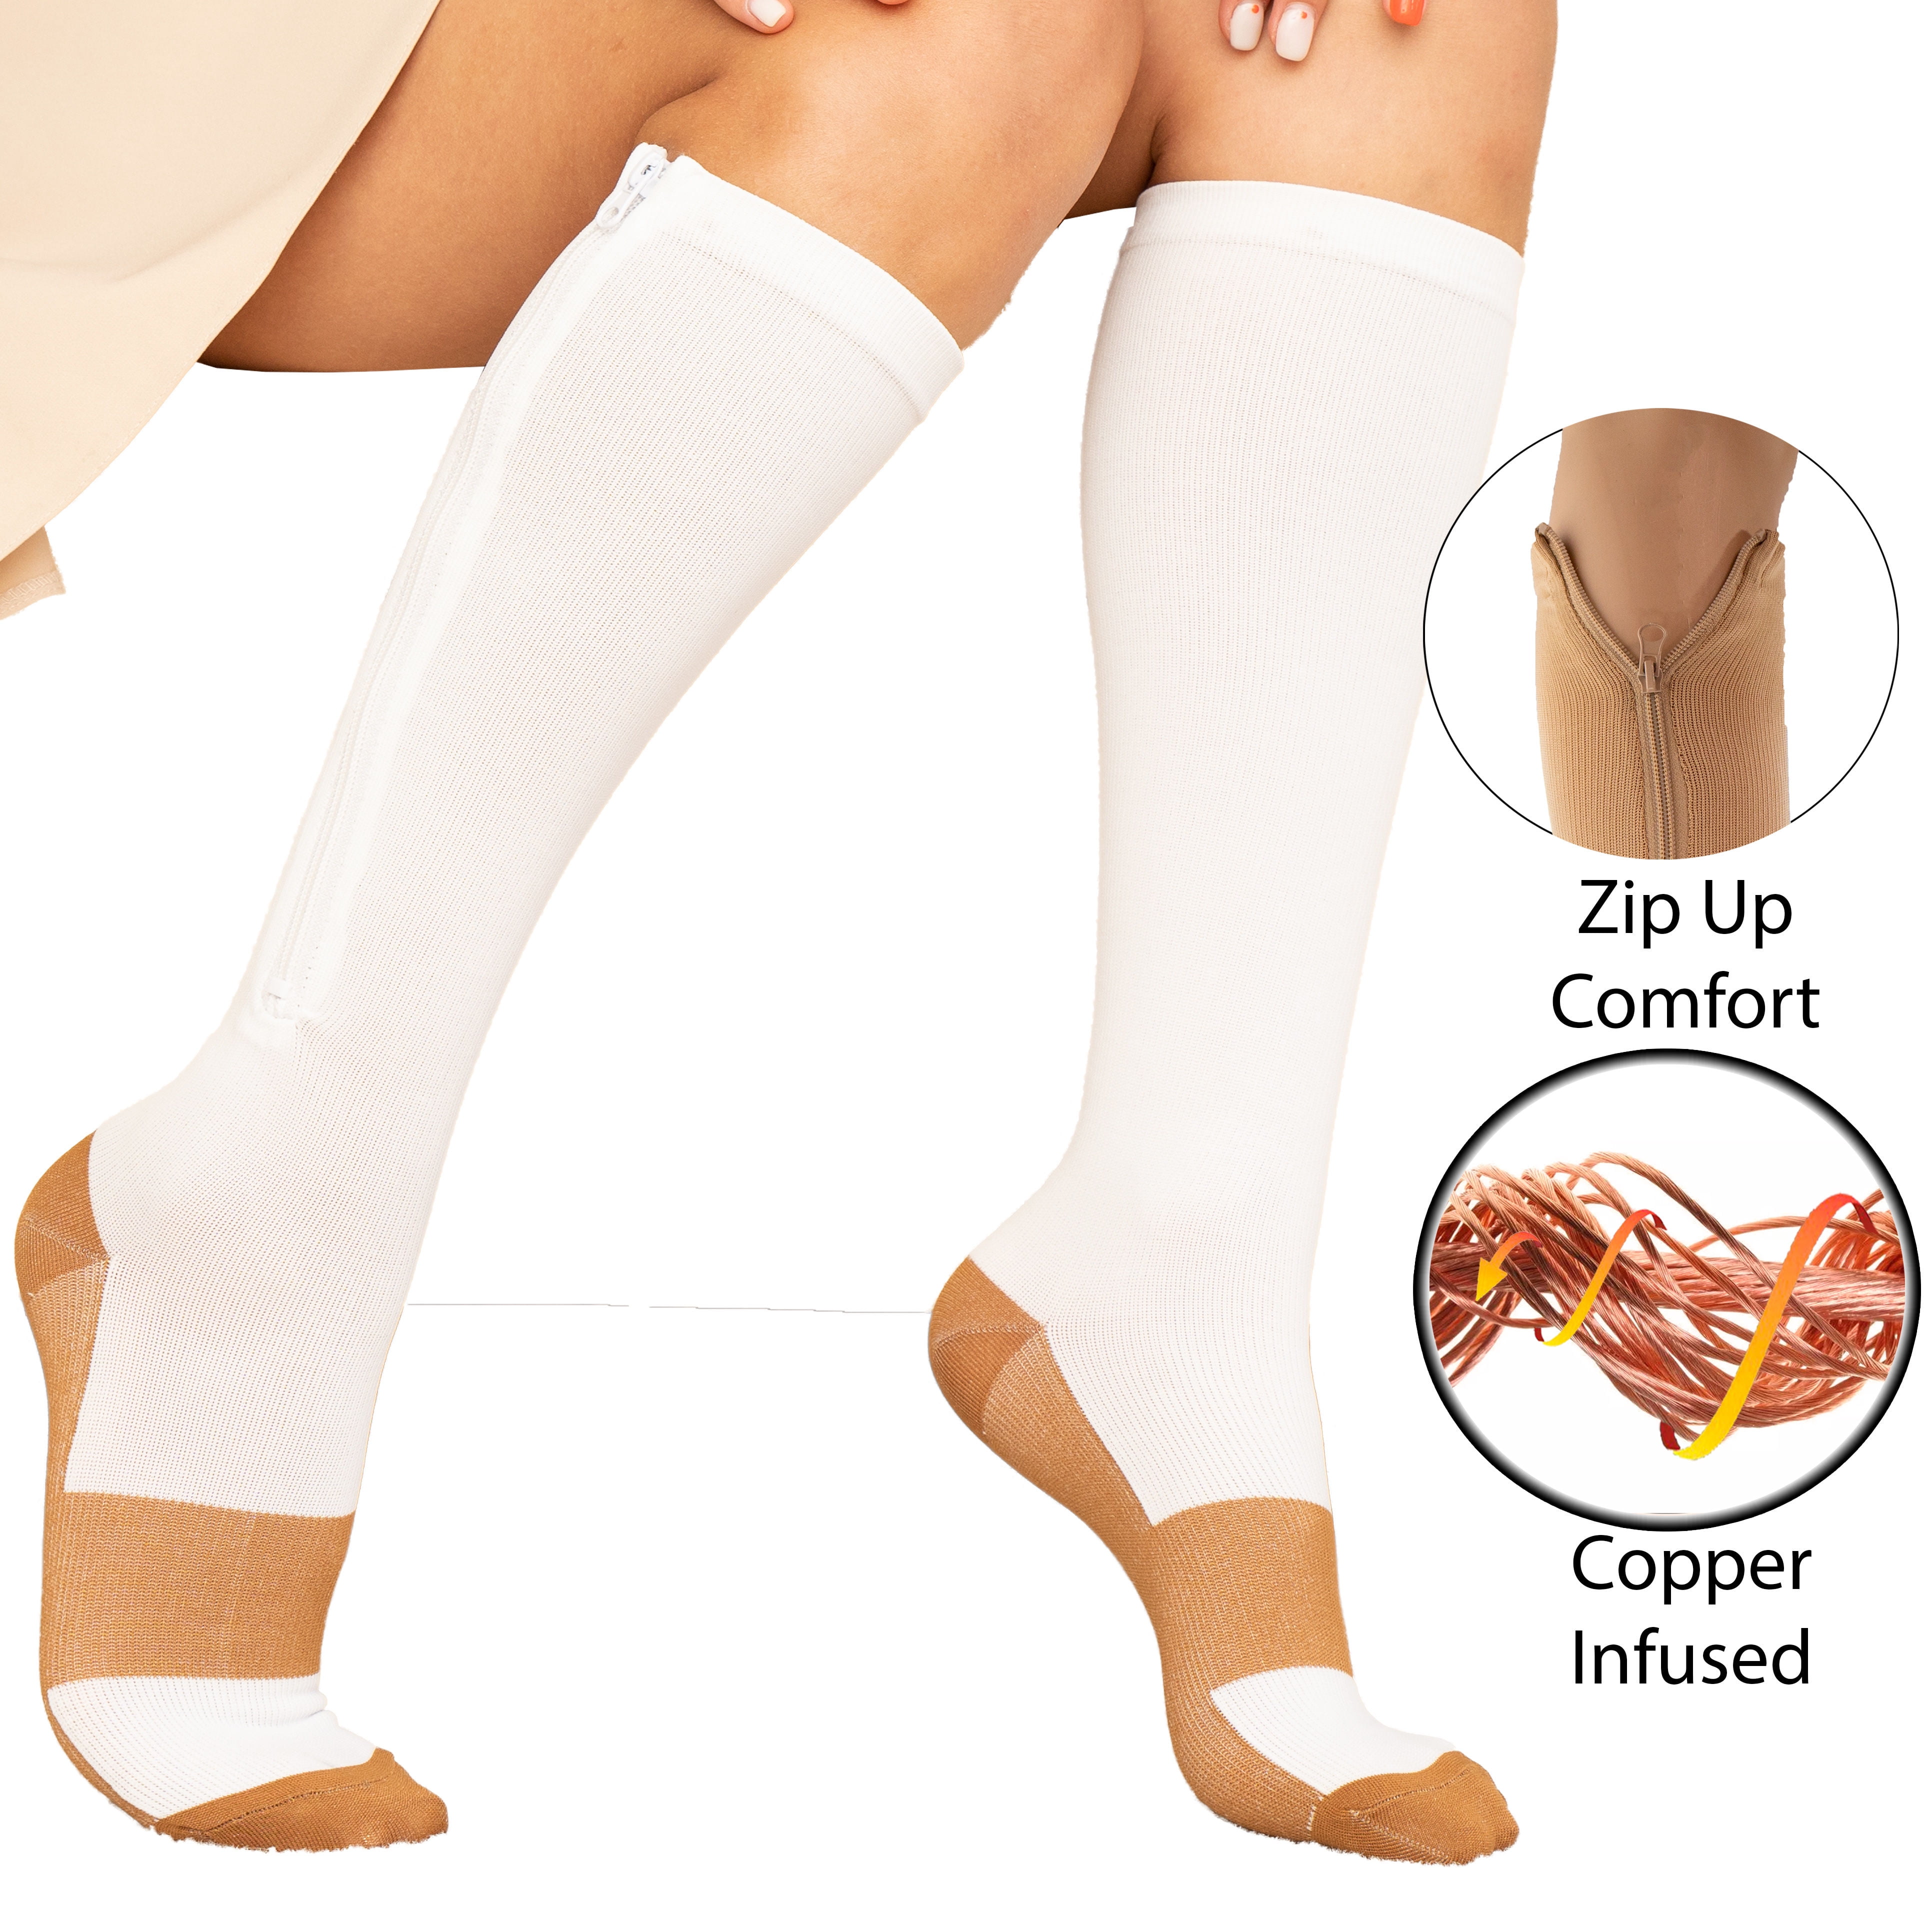 Copper Zipper Compression Socks w/ Closed Toe Knee High Support Stockings -  Soft, Breathable Compression Socks For Support, Reduce Swelling & Better  Circulation - Nude 2X-Large (2 Pairs) 